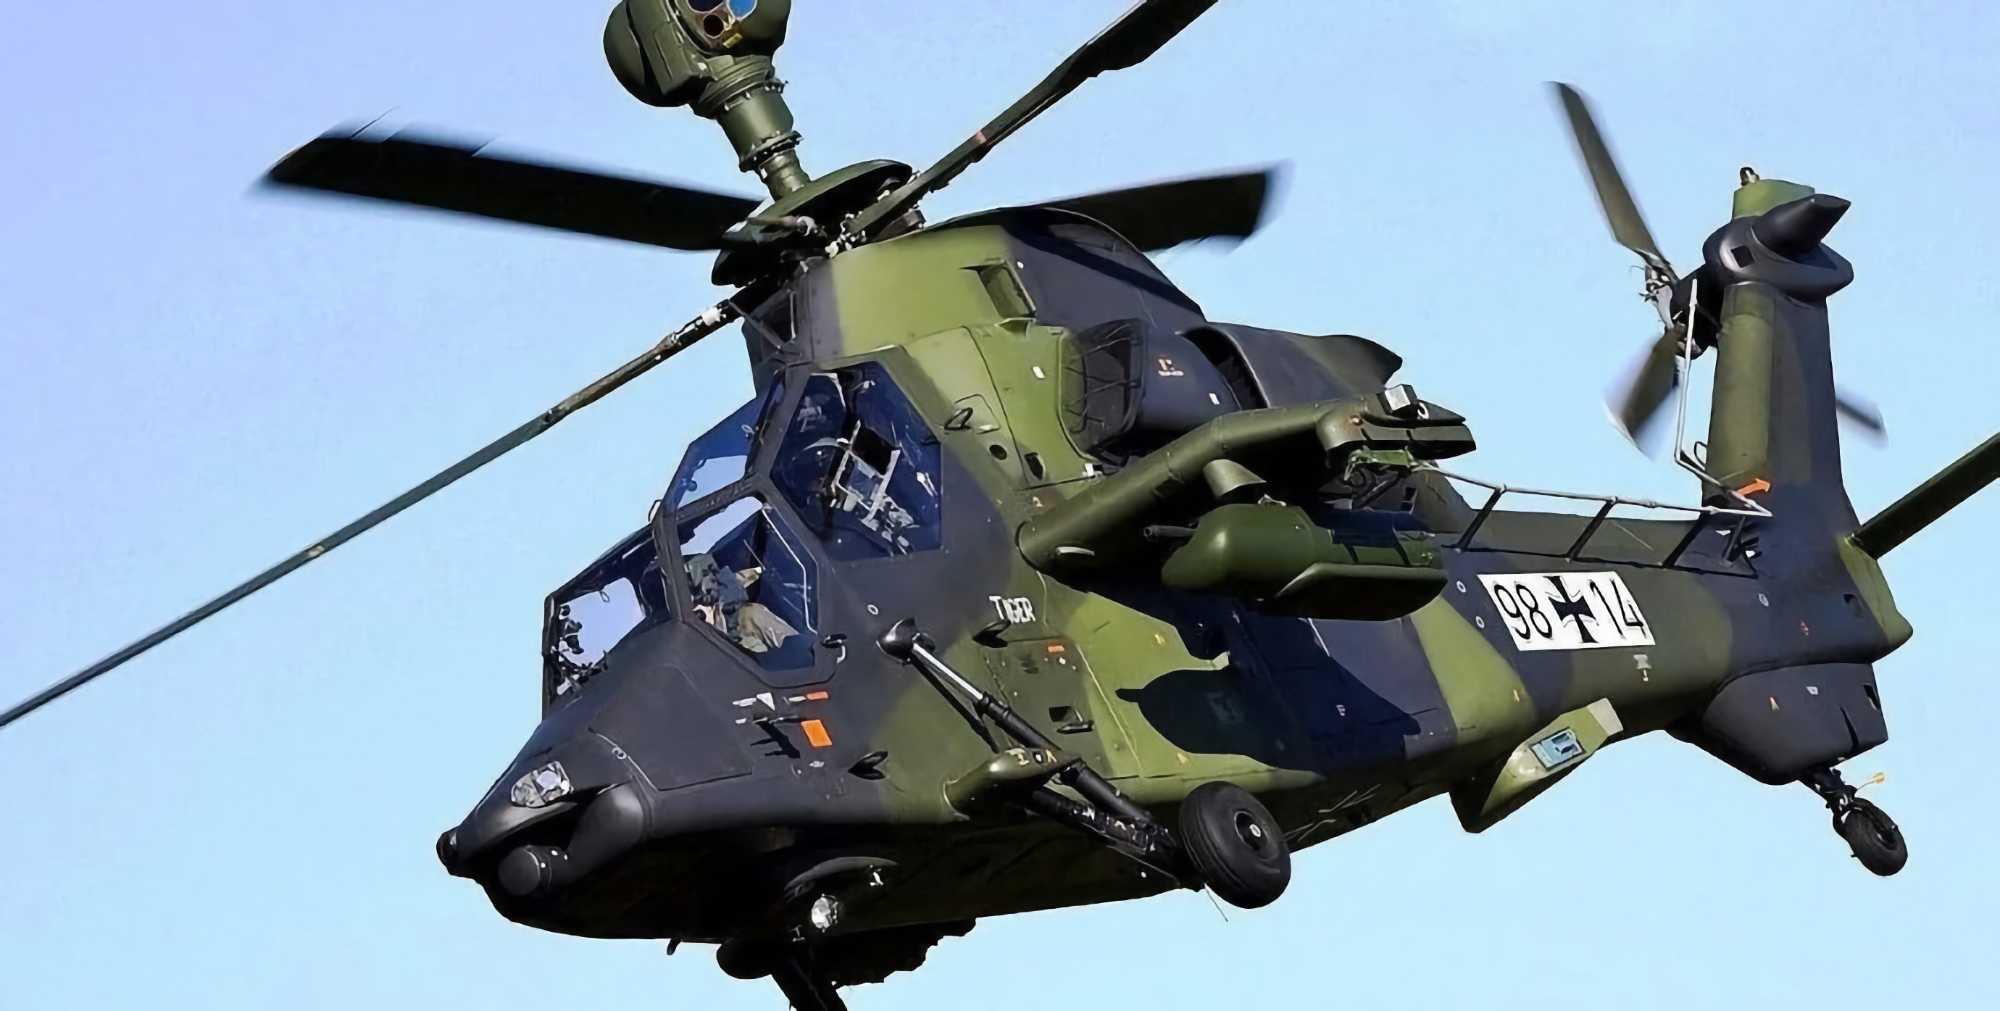 Contract worth €100 million: Germany buys 70 mm unguided rockets for Eurocopter Tiger UHT/KHT helicopters from Rheinmetall